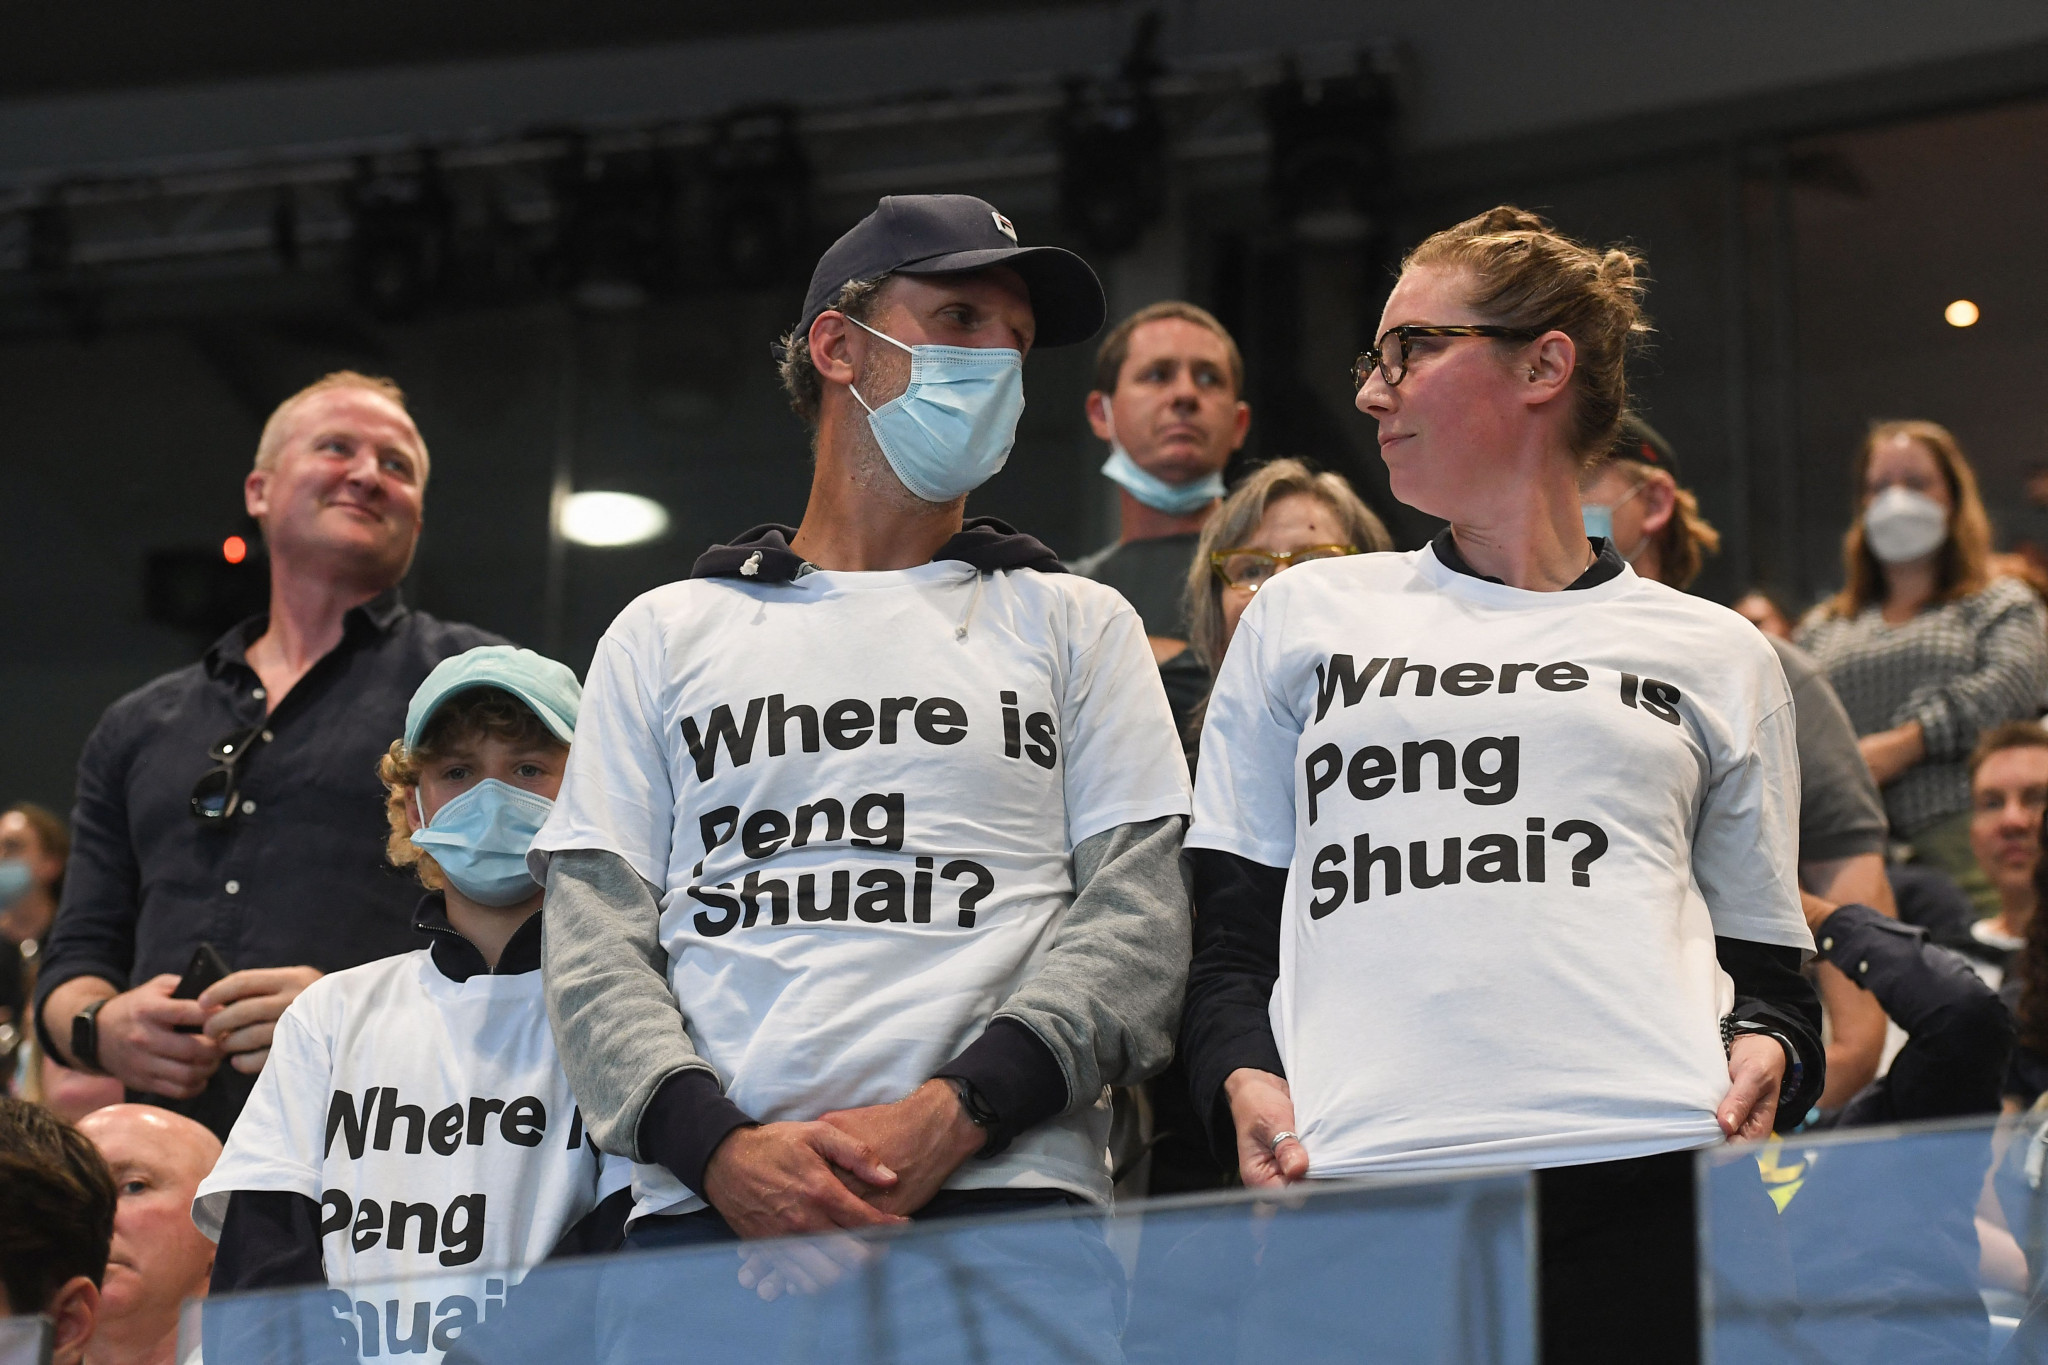 The plight of Peng Shuai has caused international outcry ©Getty Images